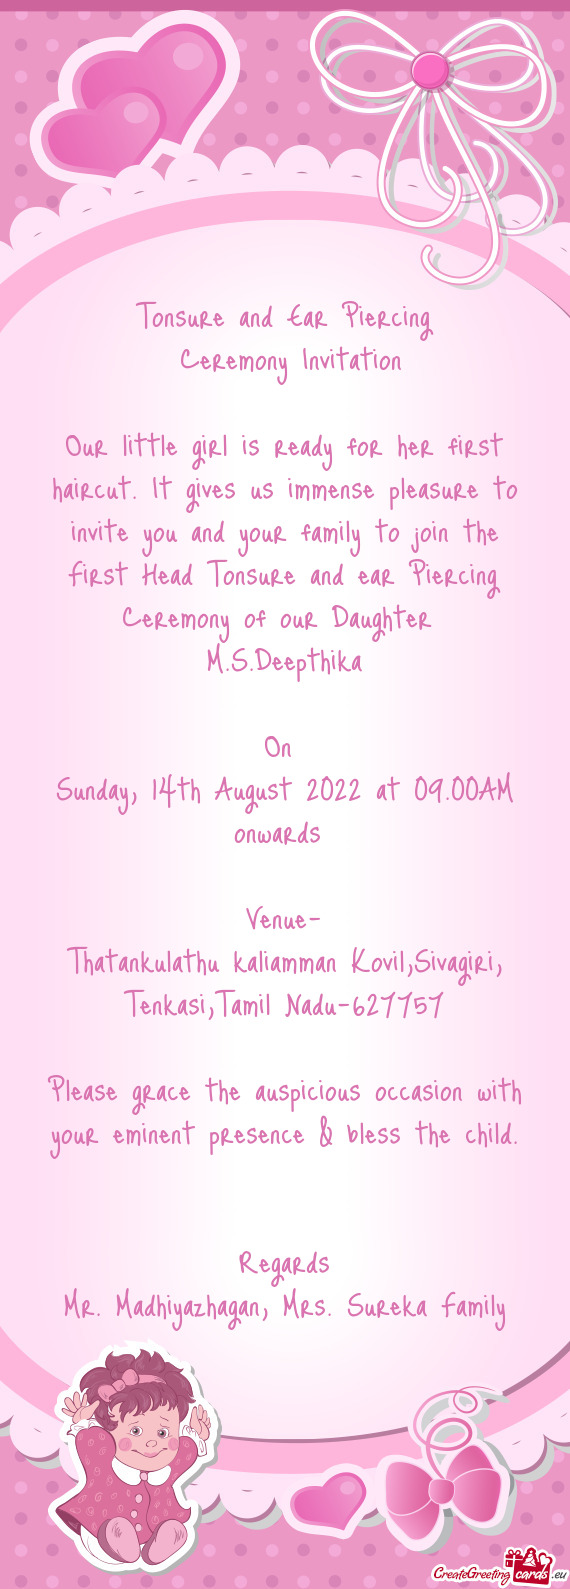 Family to join the First Head Tonsure and ear Piercing Ceremony of our Daughter